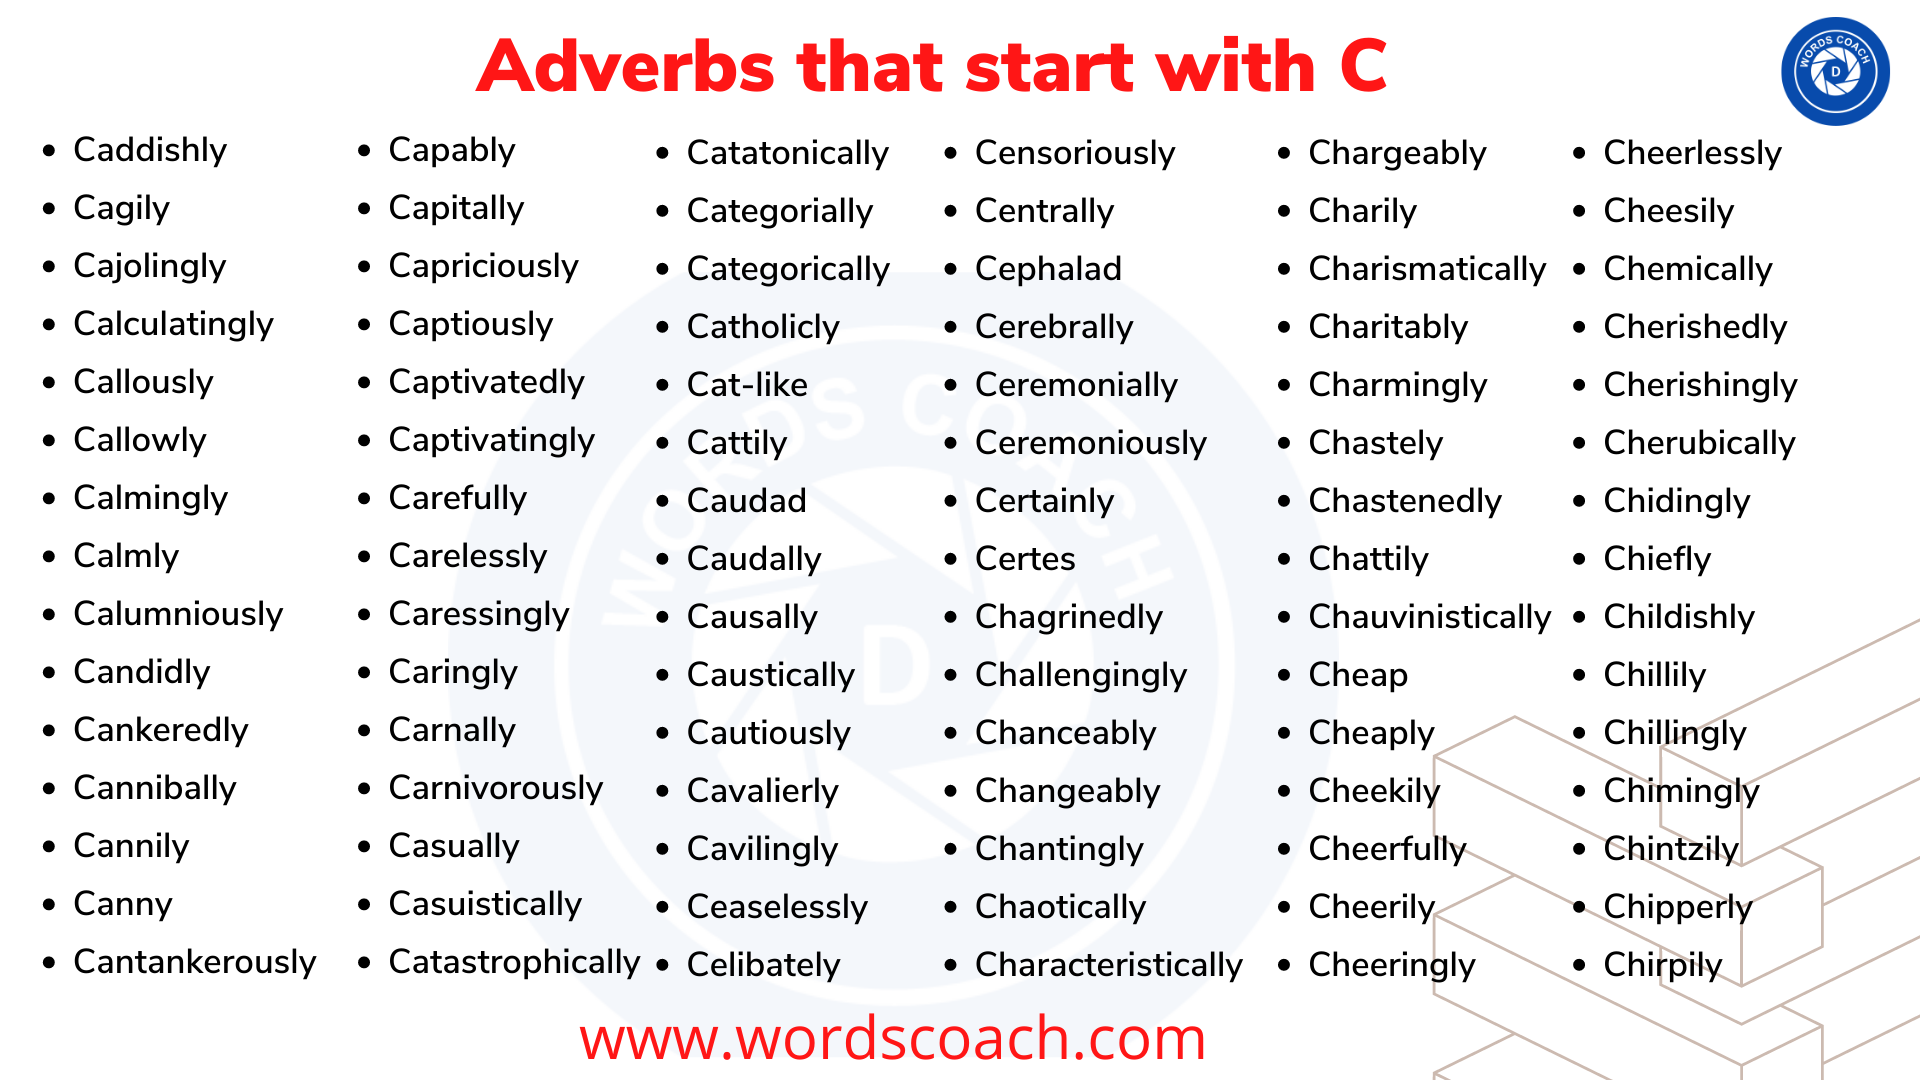 Adverbs that start with C